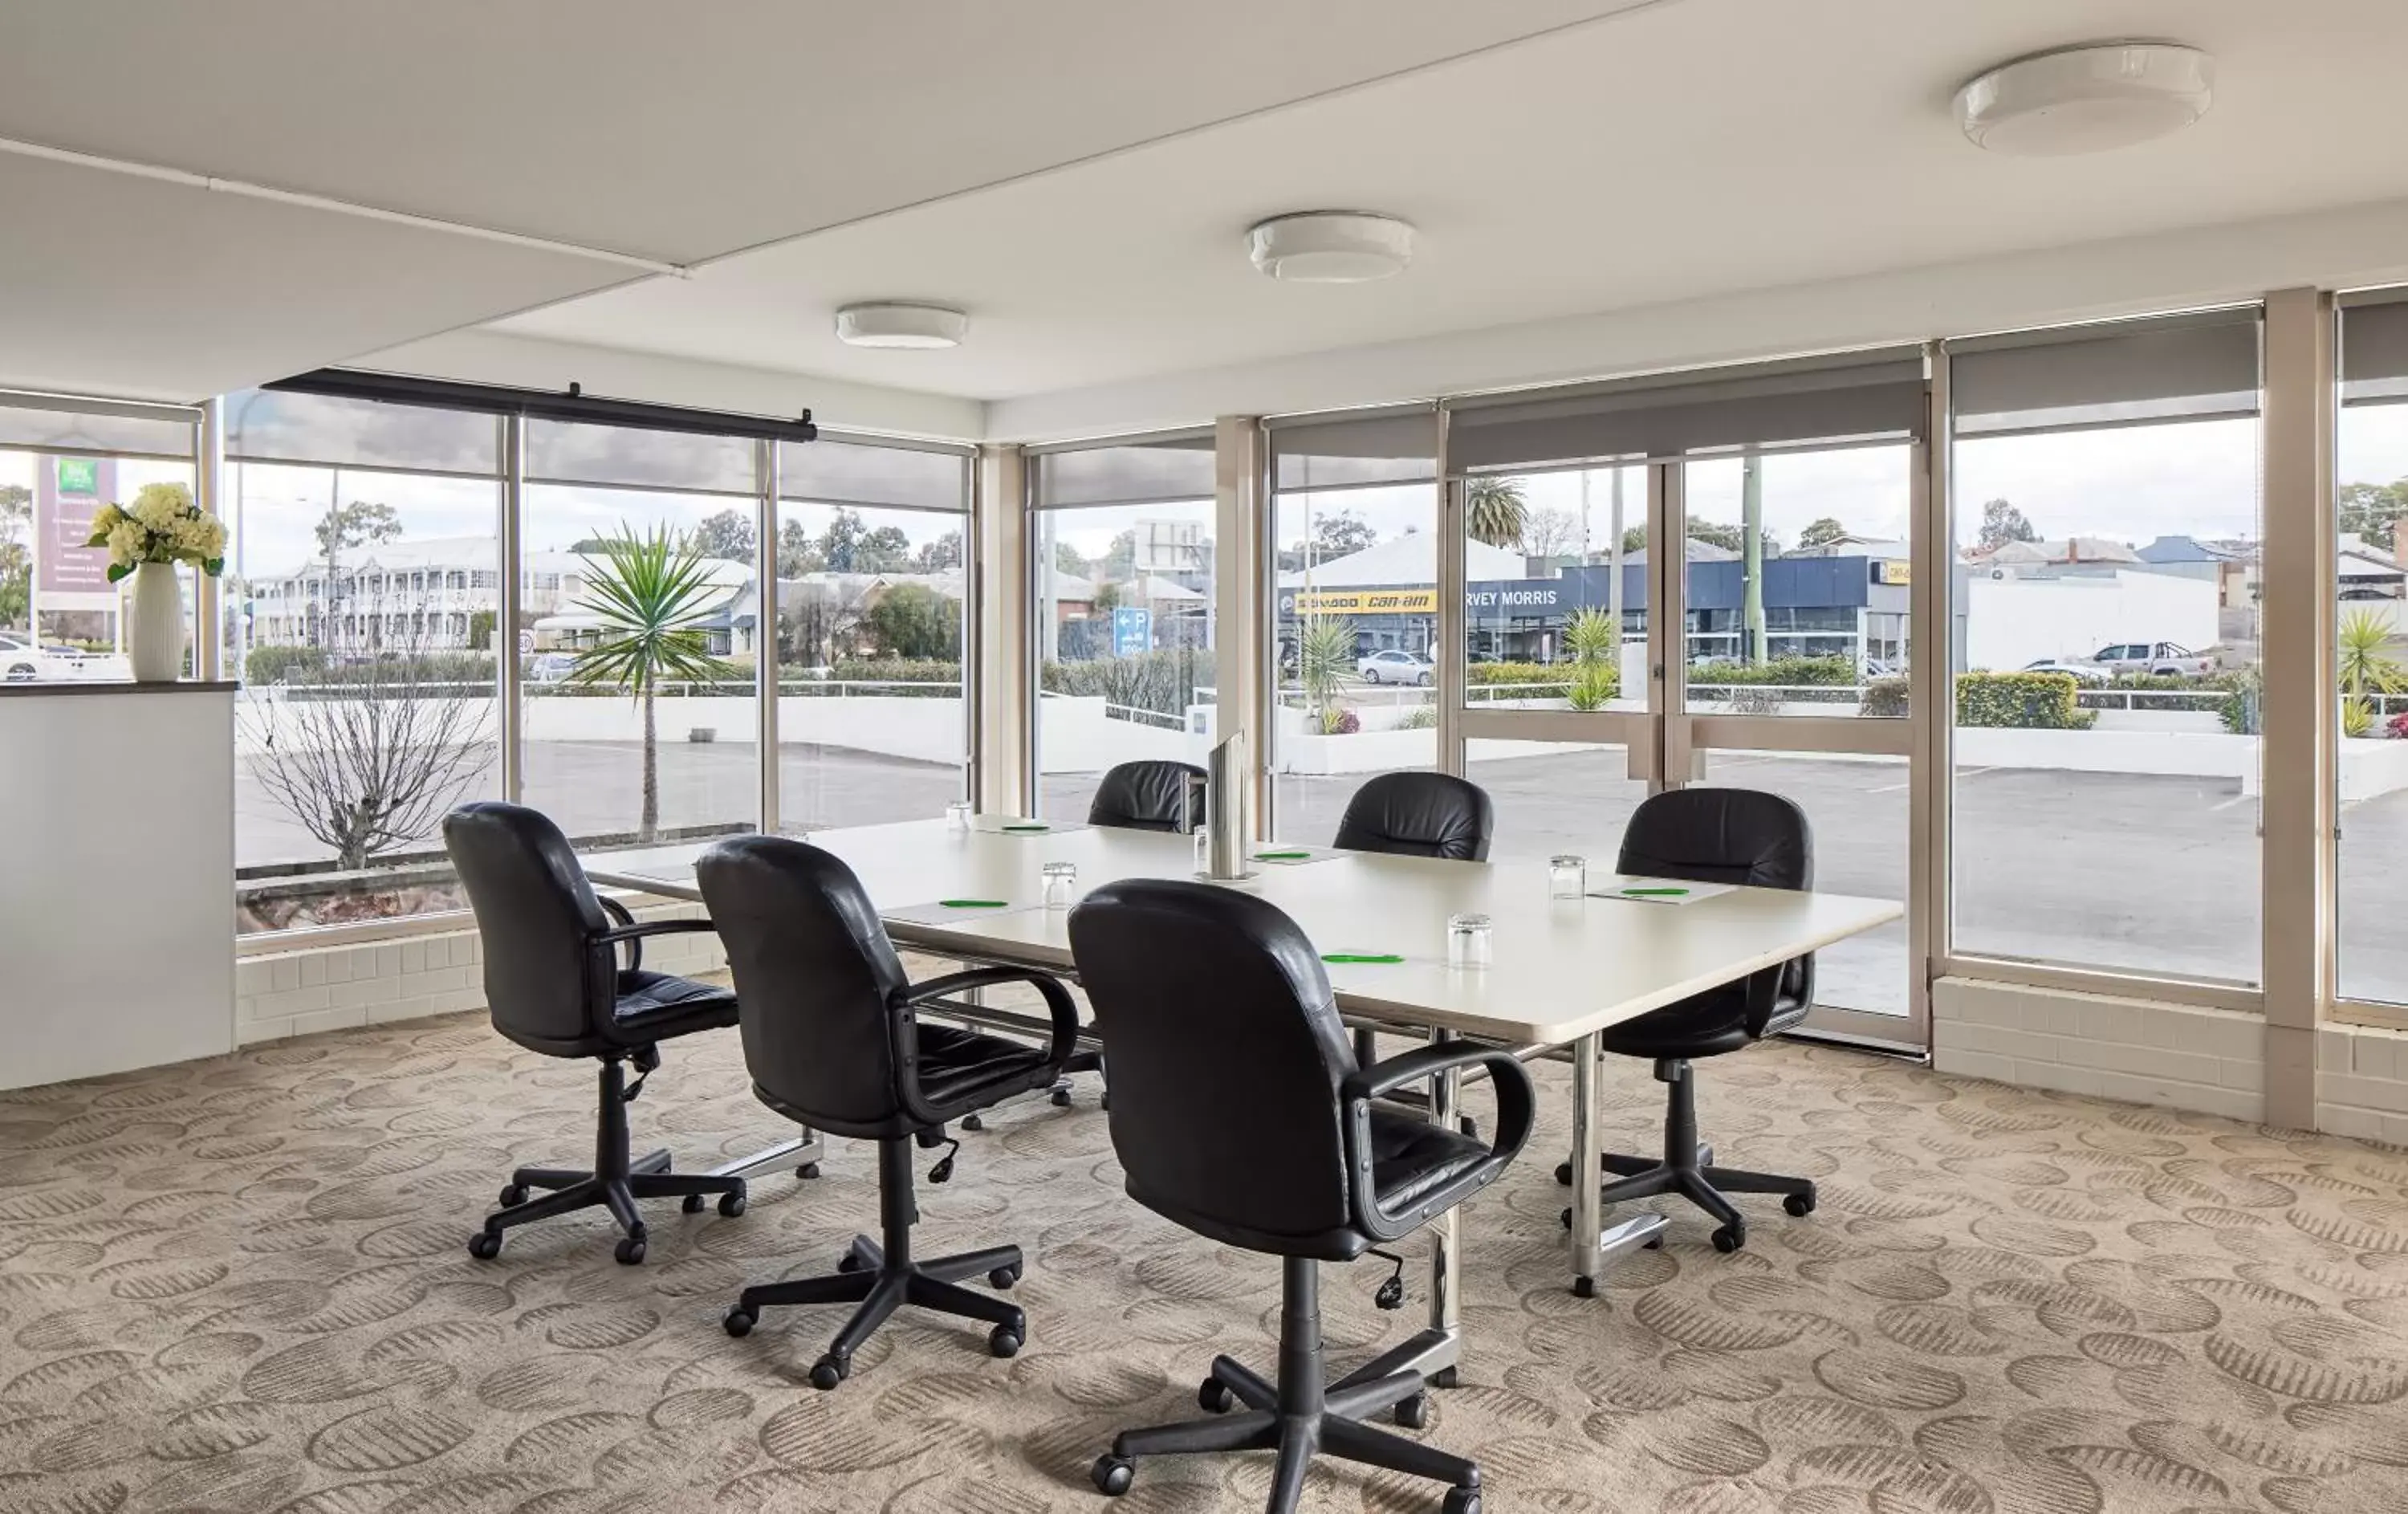 Meeting/conference room in ibis Styles Tamworth